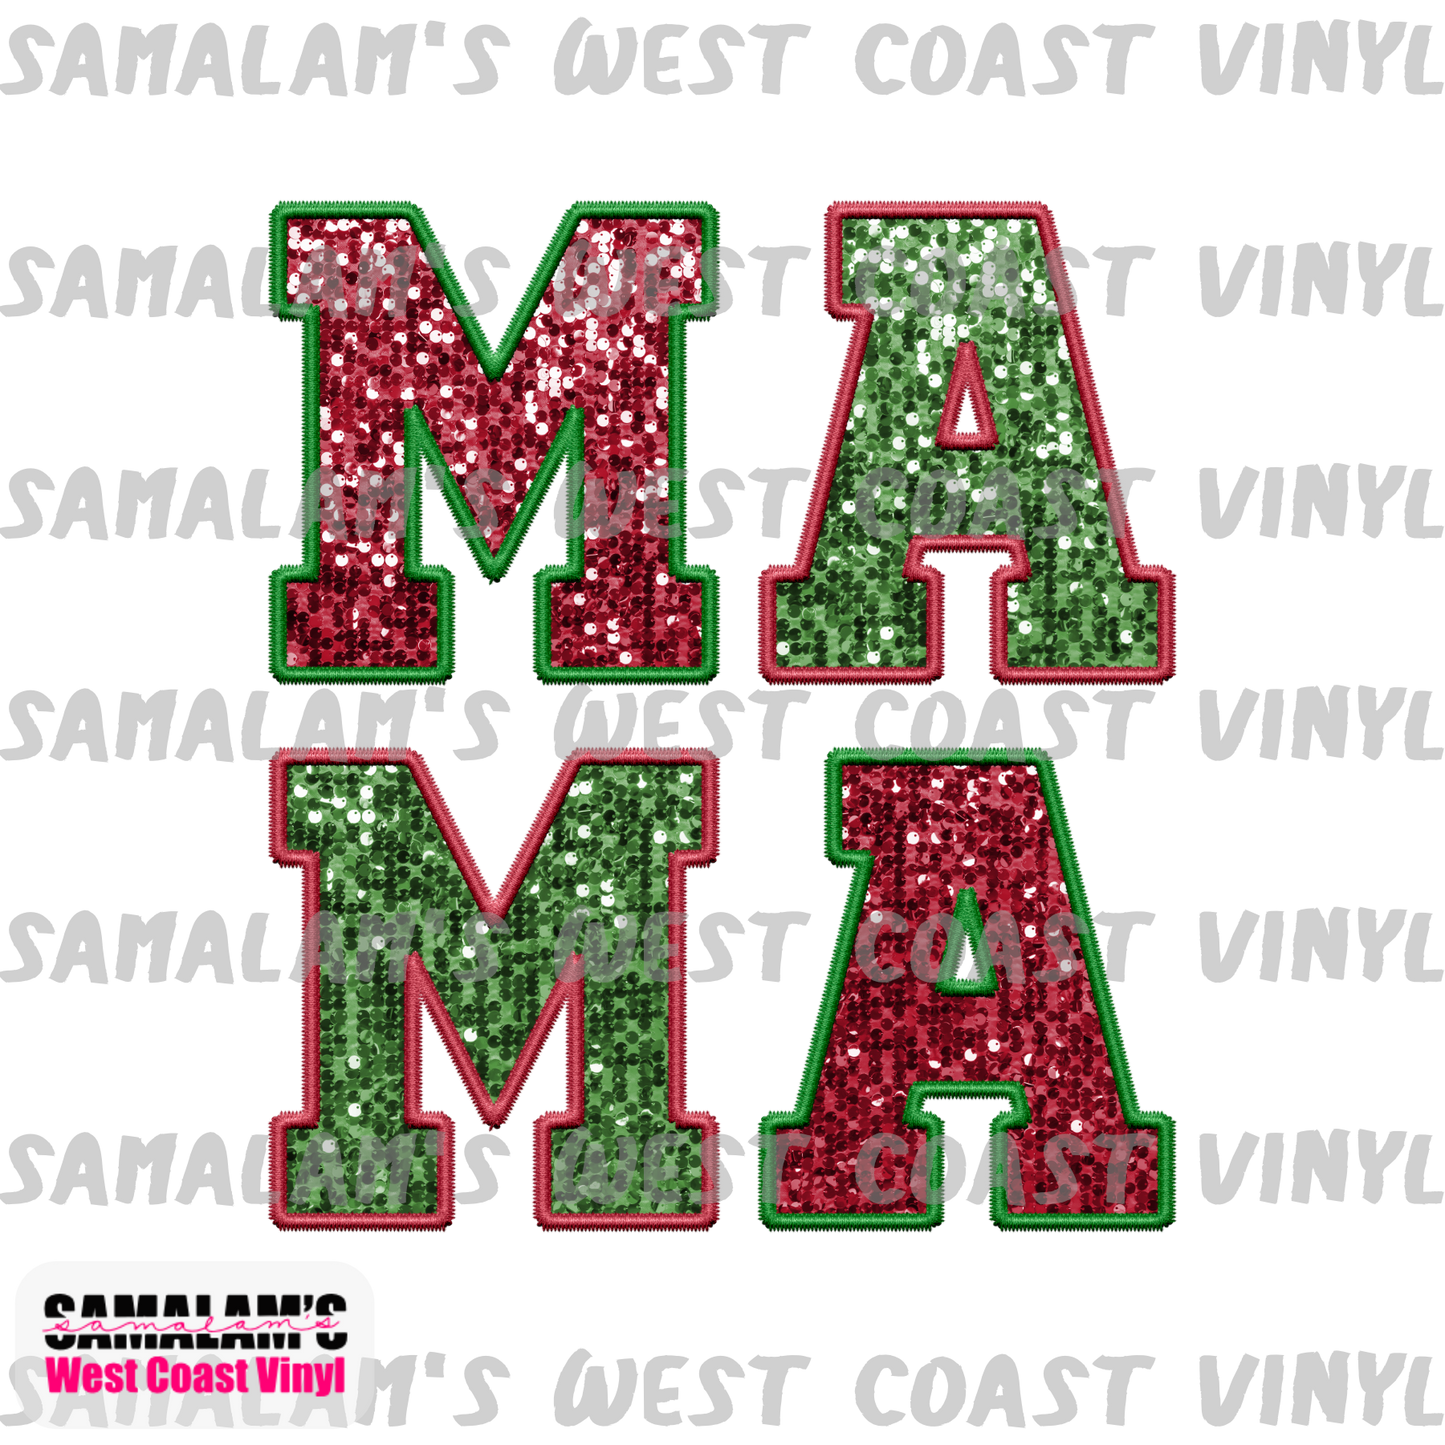 Embroidery - Mama - Red Green - Clear Cast Decal